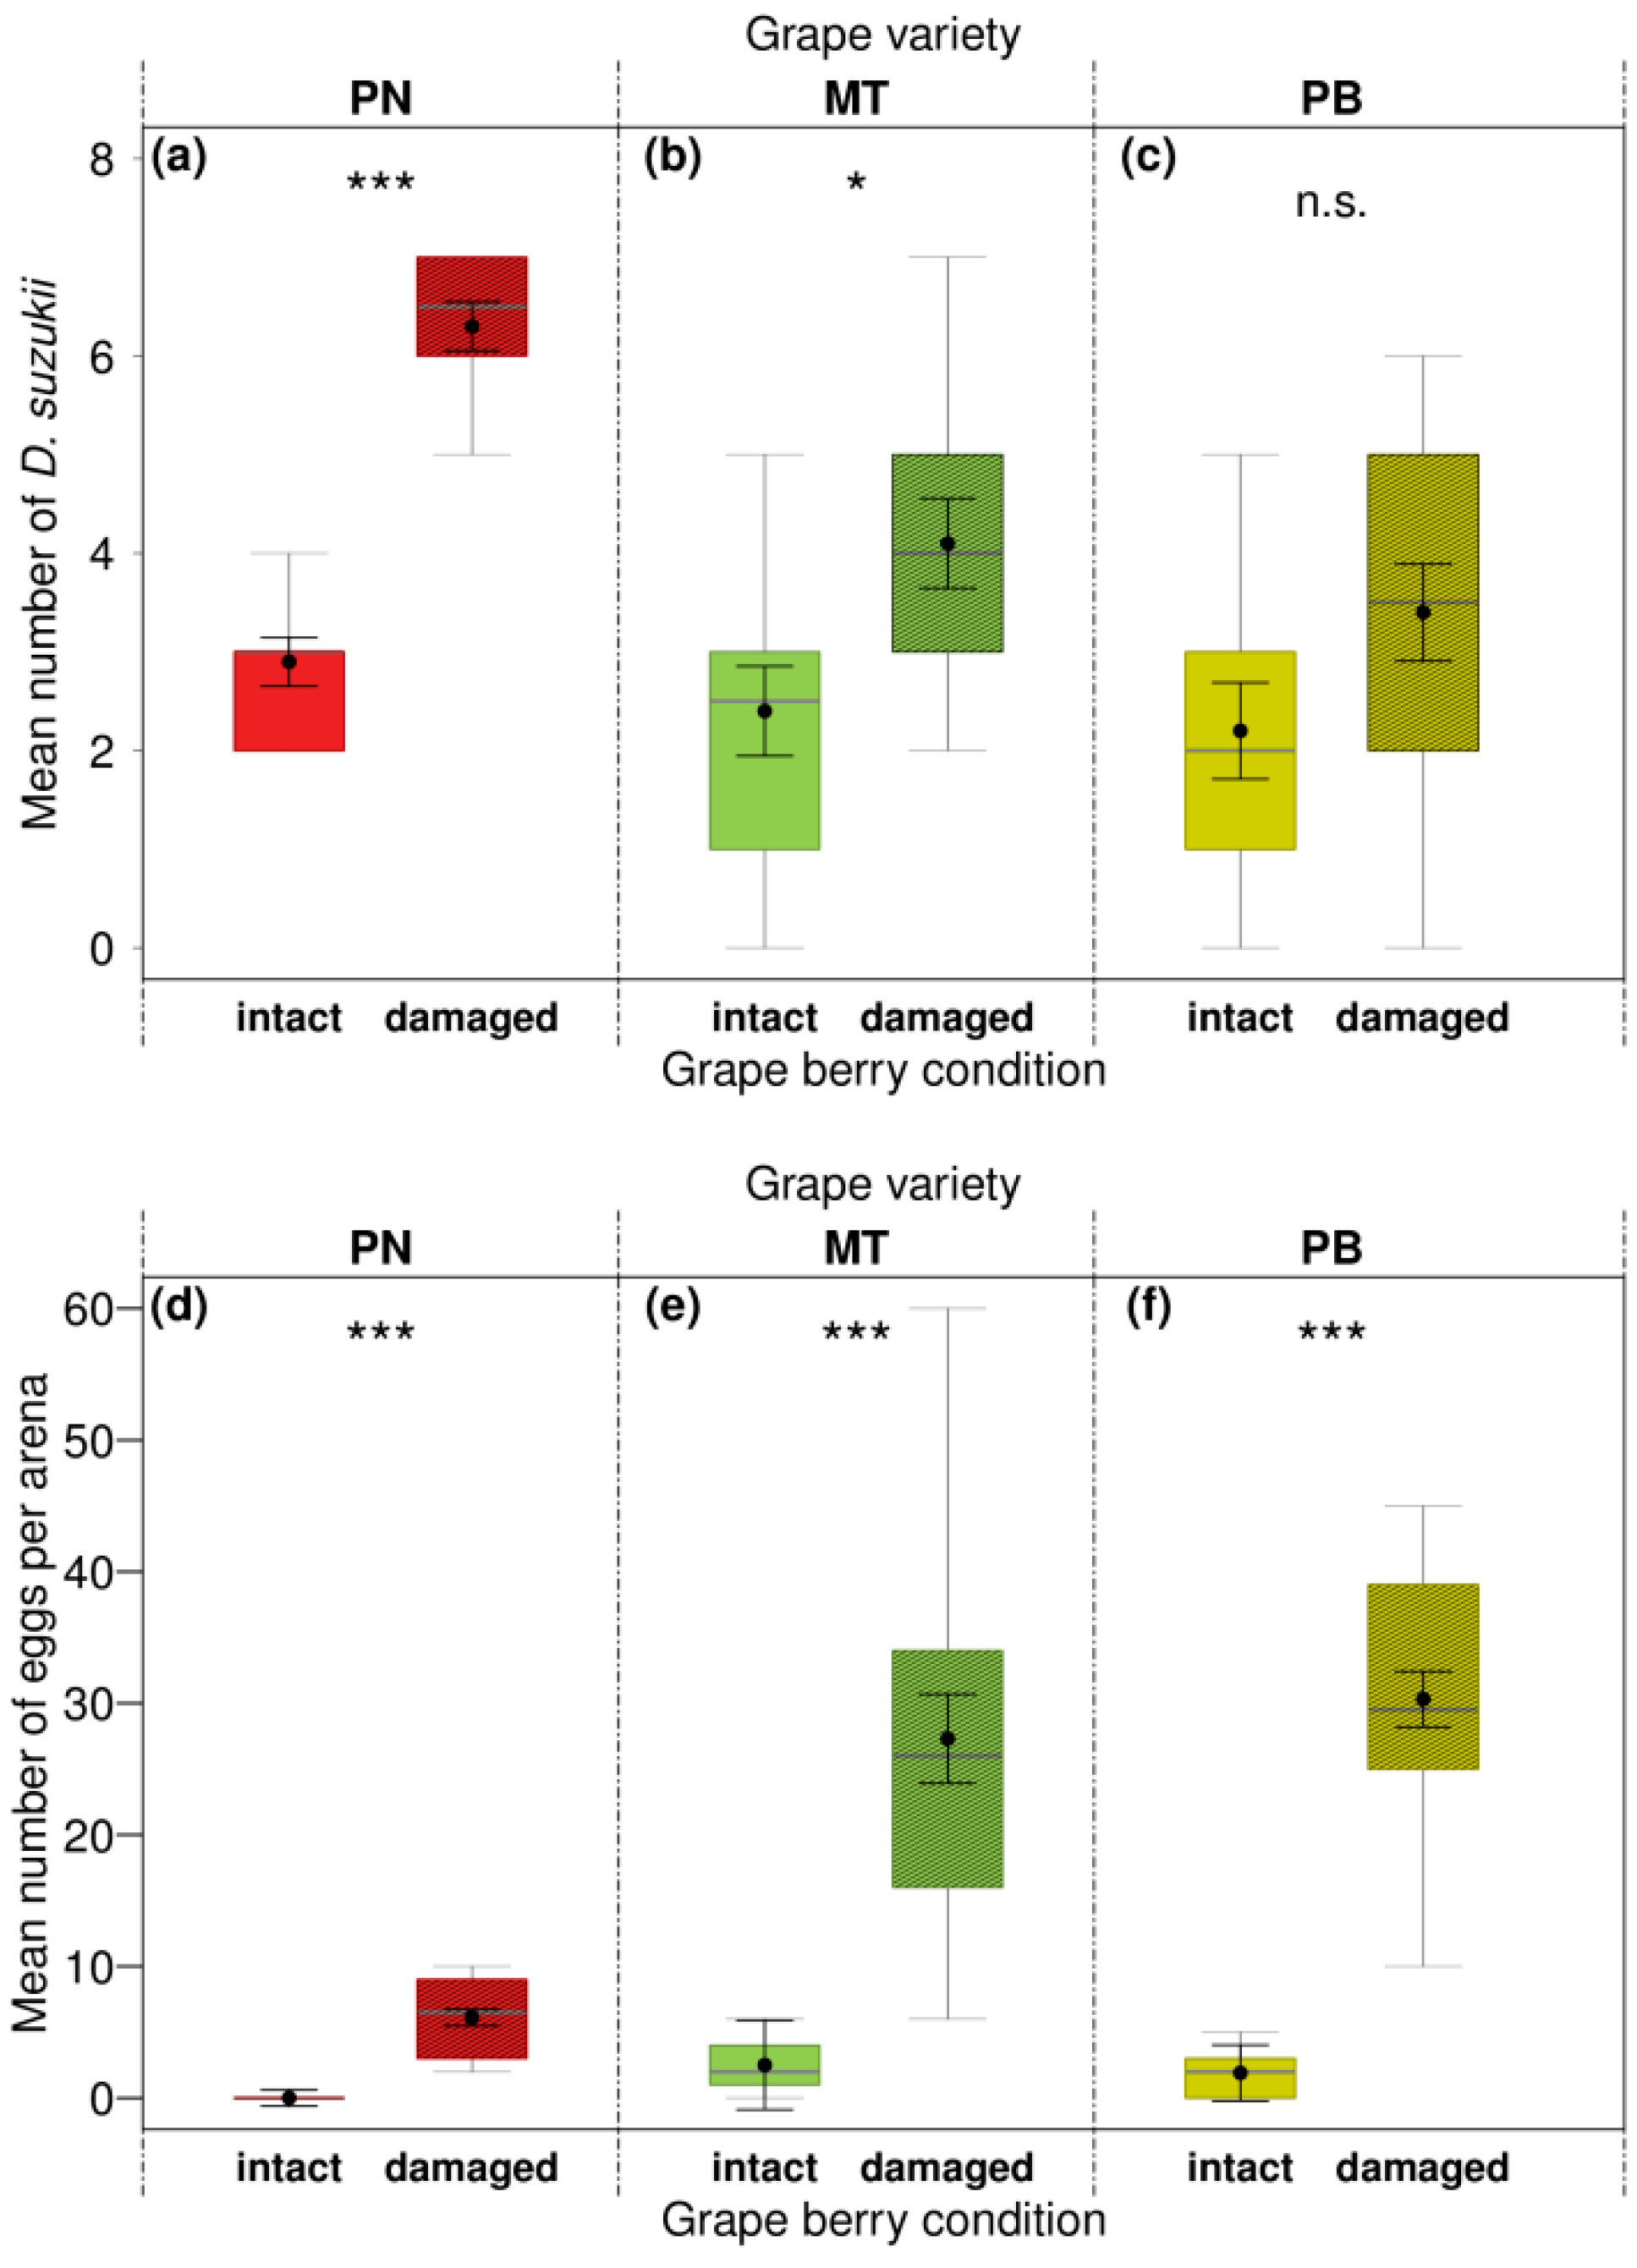 Insects | Free Full-Text | Effects of Variety and Grape Berry Condition of  Vitis vinifera on Preference Behavior and Performance of Drosophila suzukii  | HTML